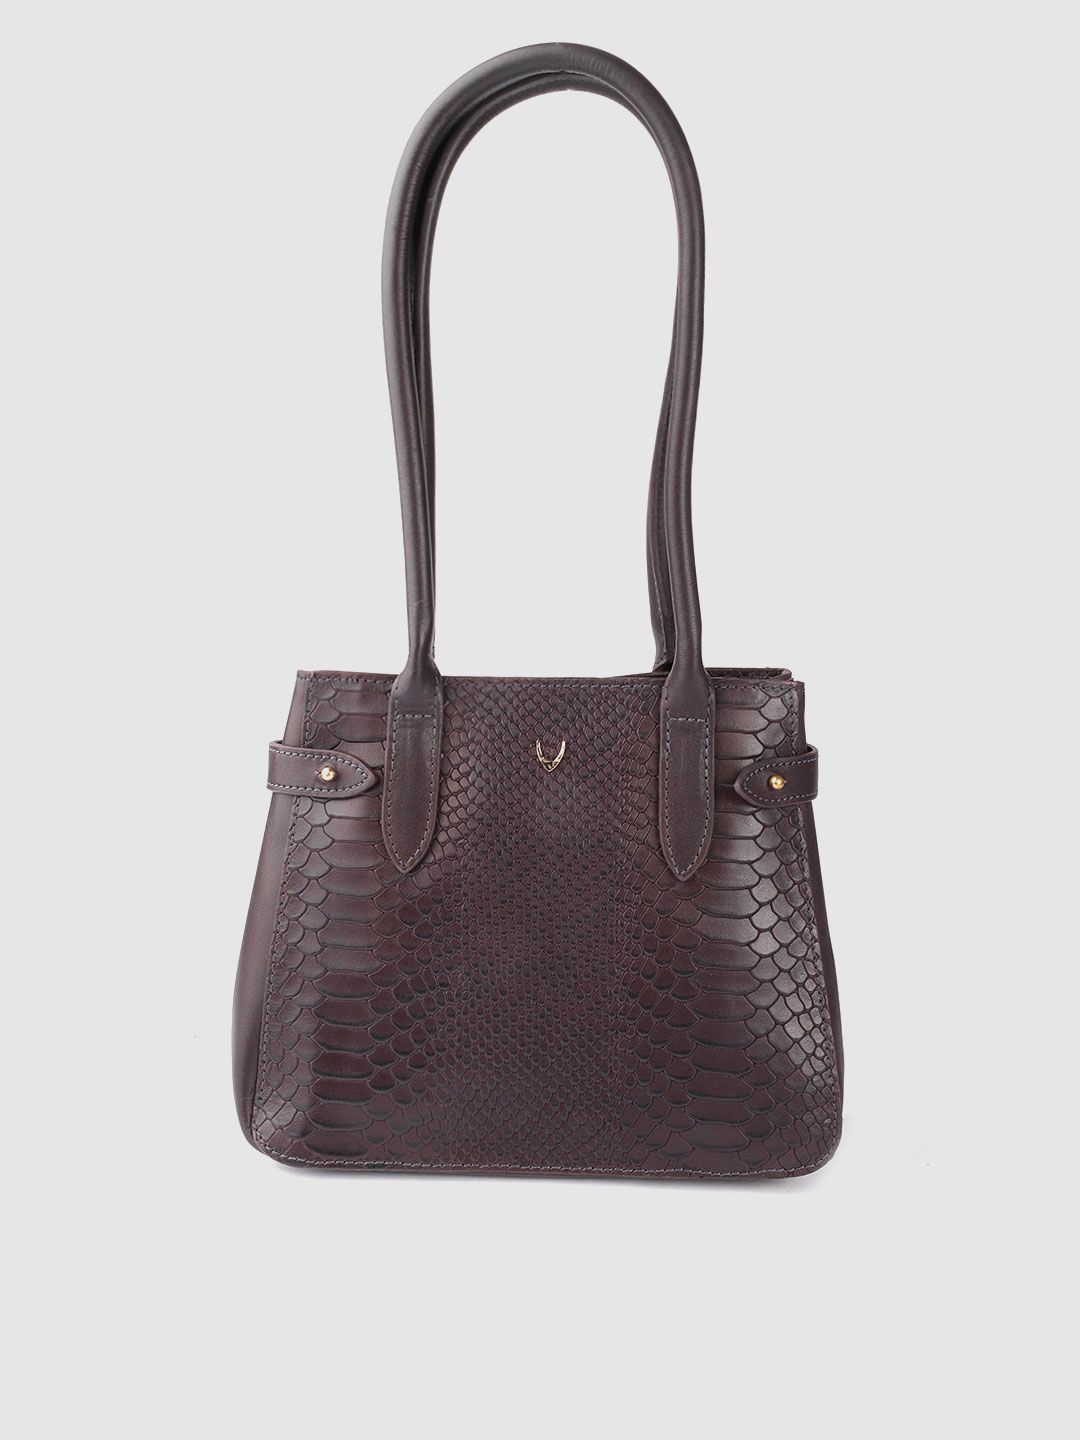 Hidesign Aubergine Snakeskin Textured Leather Handcrafted Structured Shoulder Bag Price in India